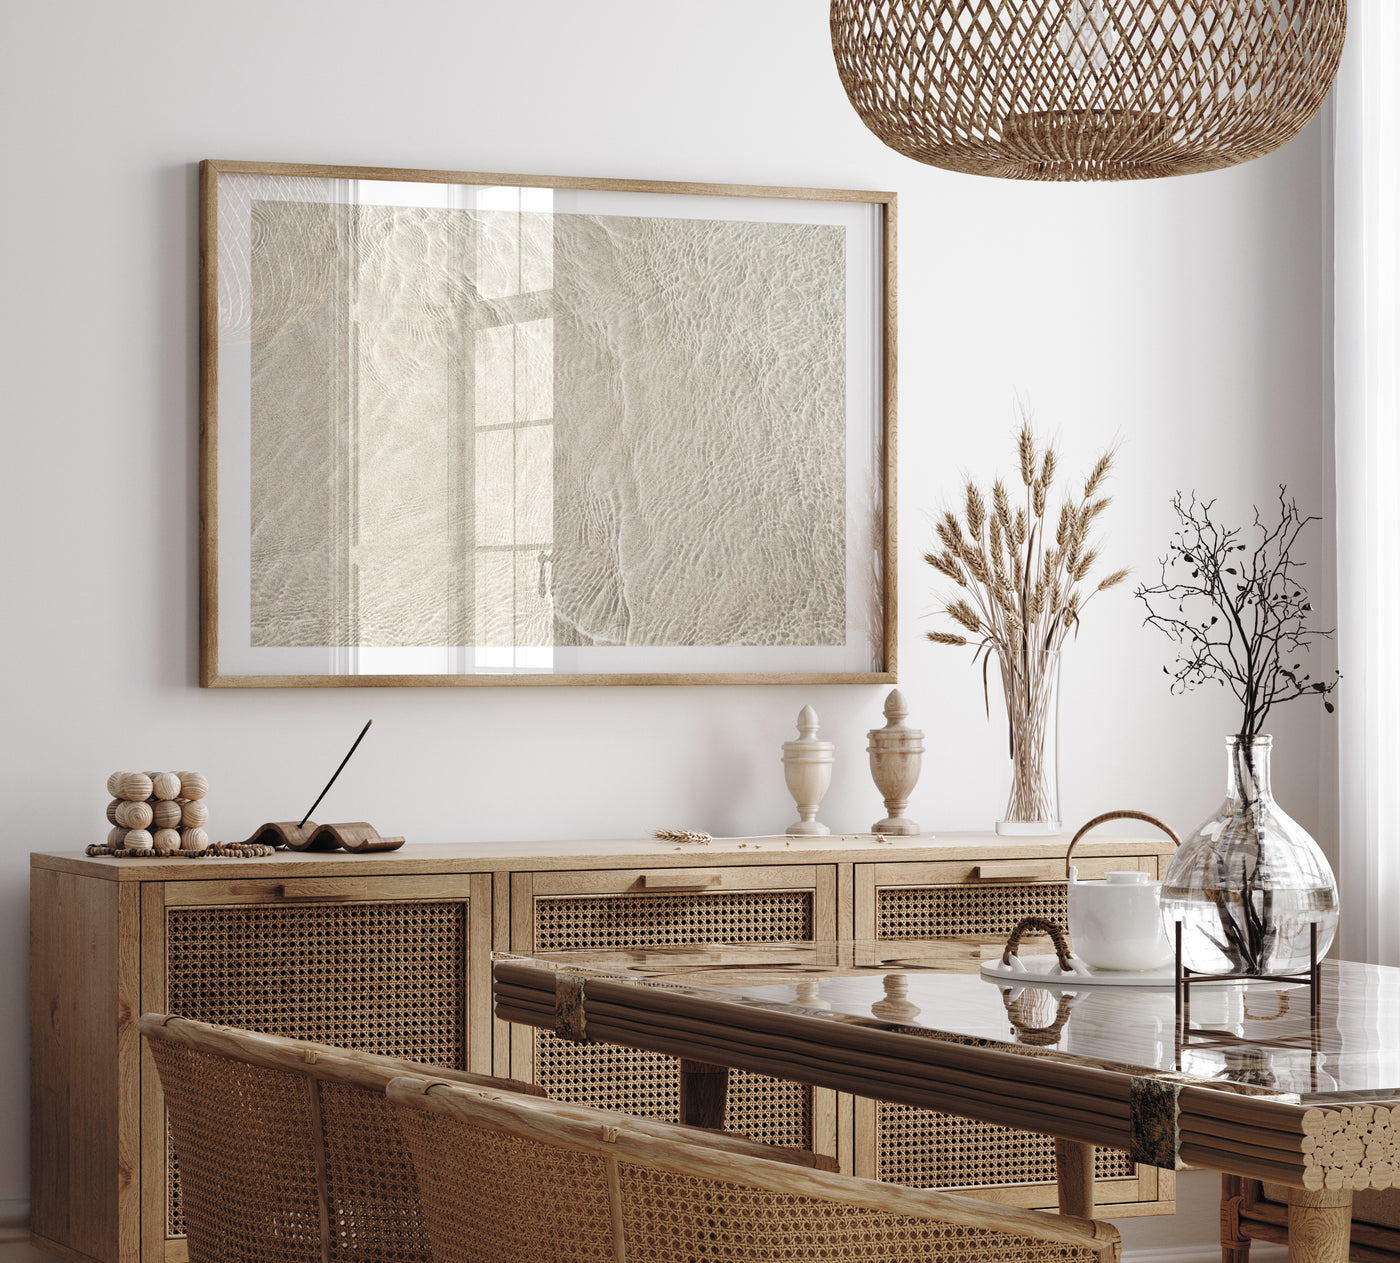 Shallow Water No 26 - Large neutral art print by Cattie Coyle Photography in dining room